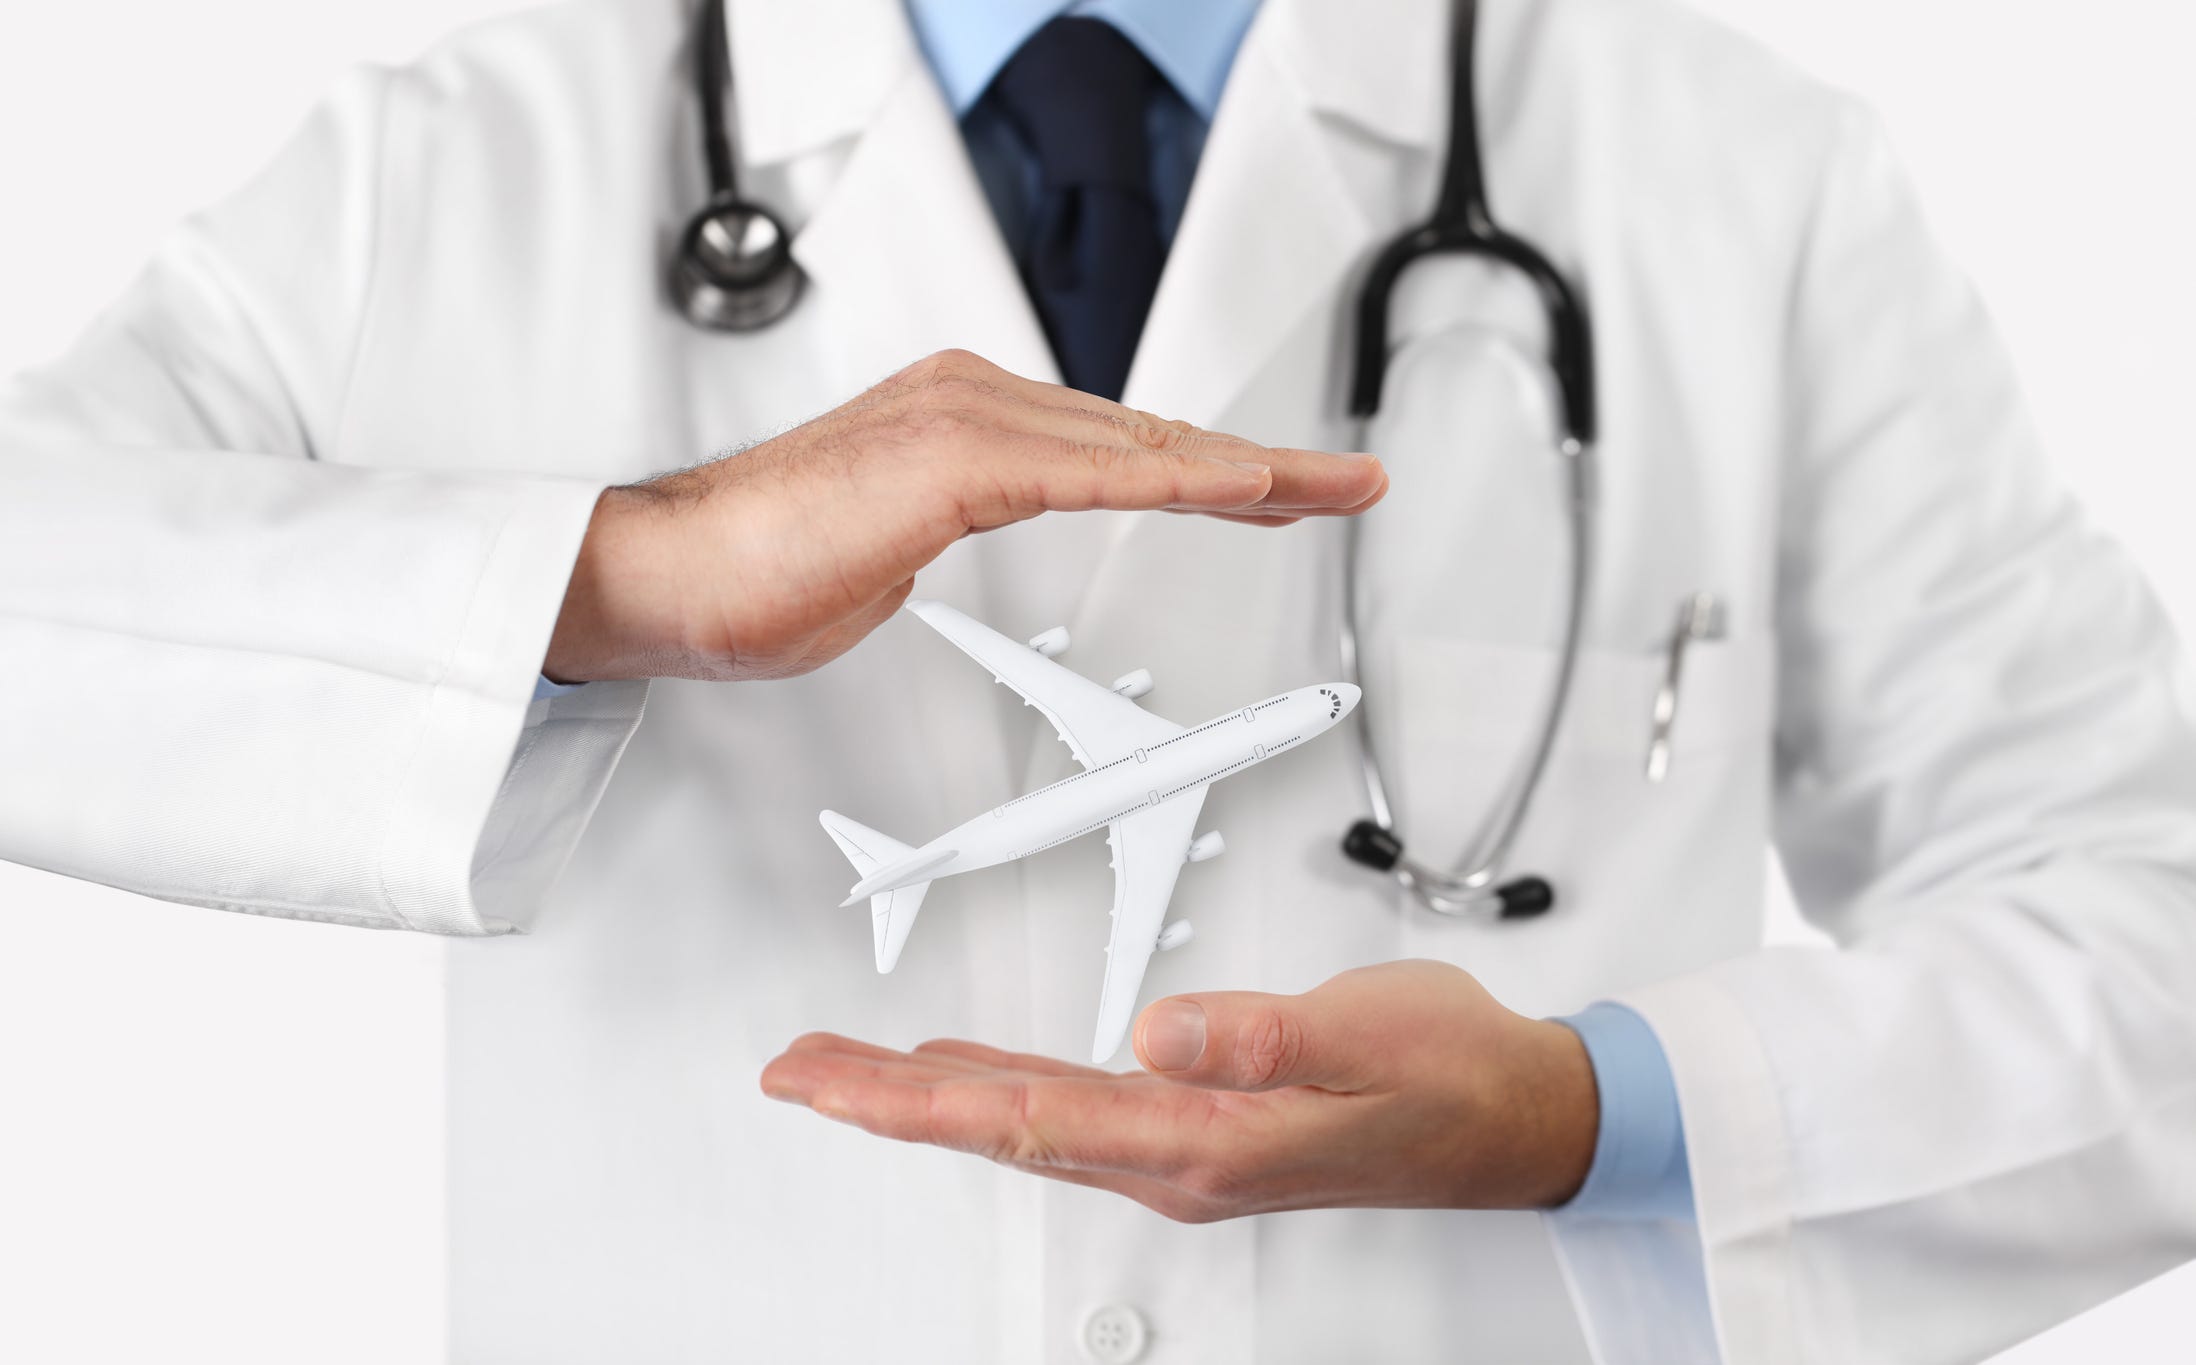 Travel medical insurance: What you need to know before buying it